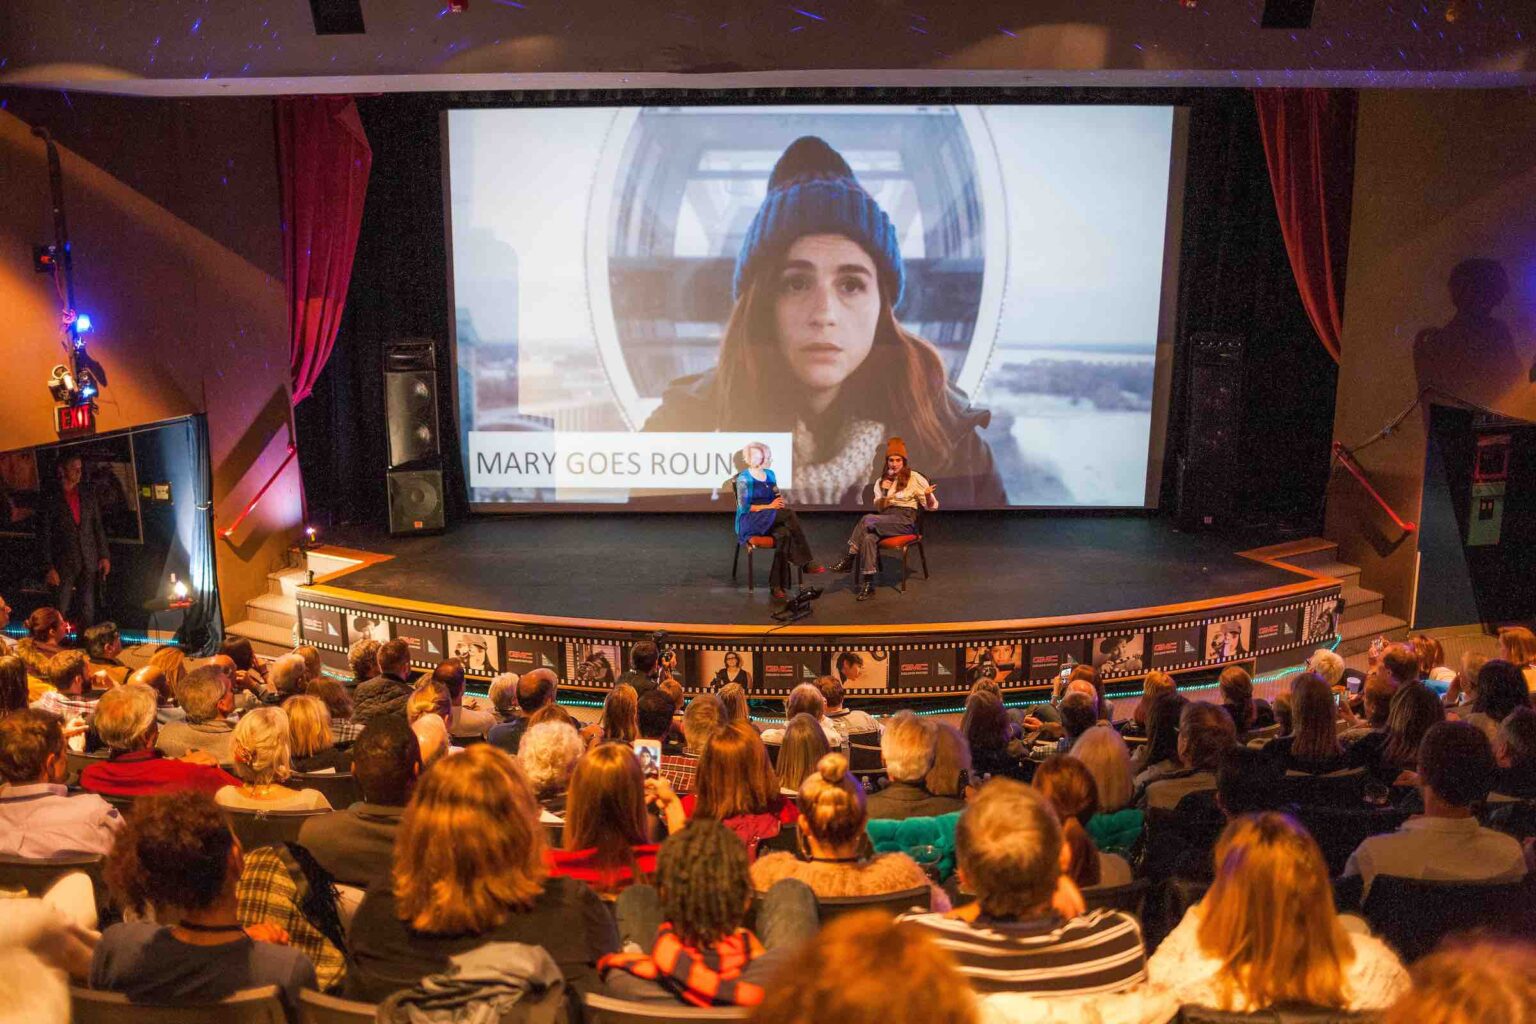 The Vail Film Festival is just moving to the digital space for its 2020 edition due to quarantine restrictions. Here's why you should pay attention.